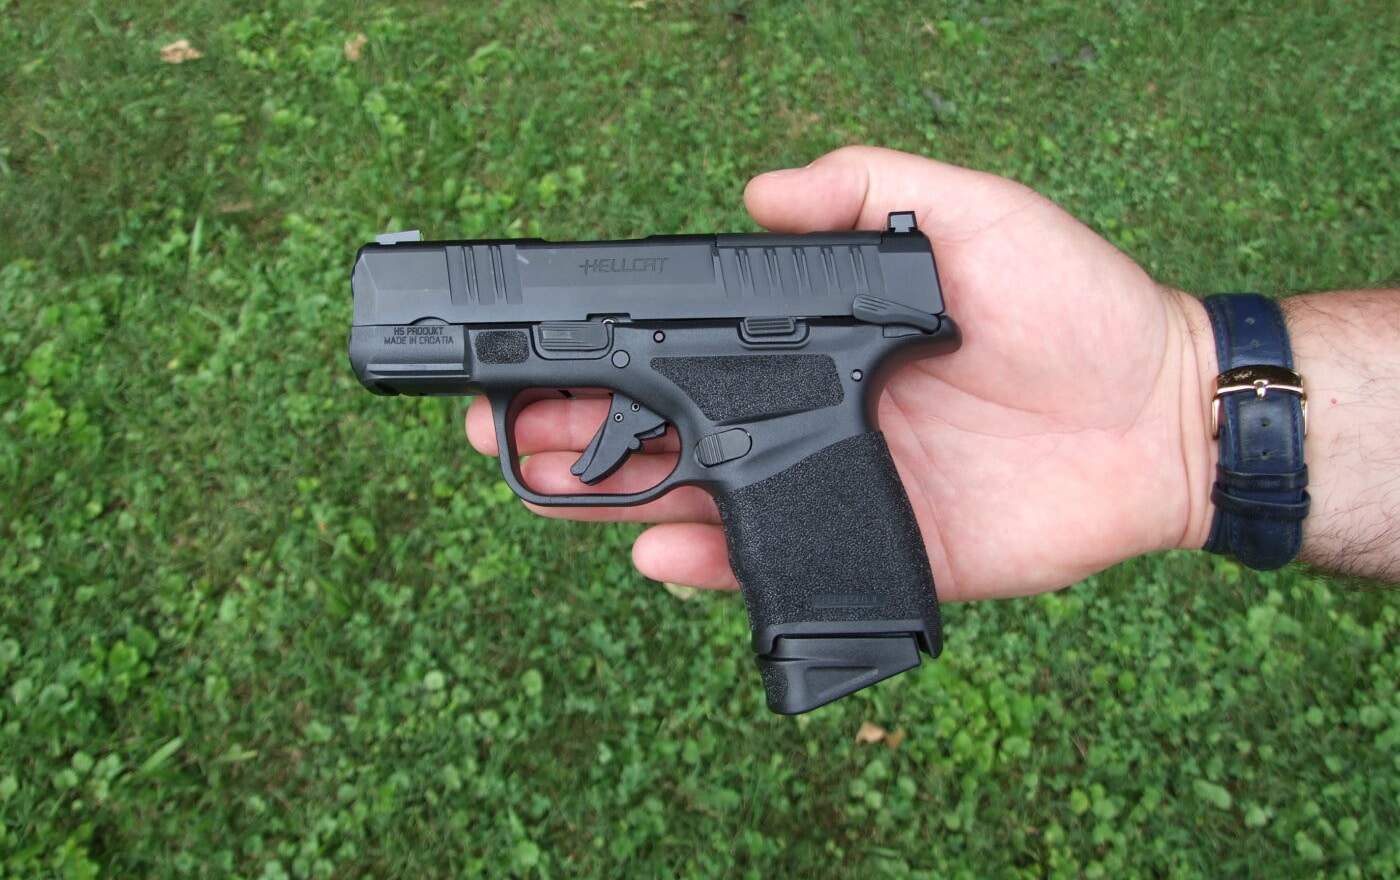 Hellcat pistol with manual thumb safety